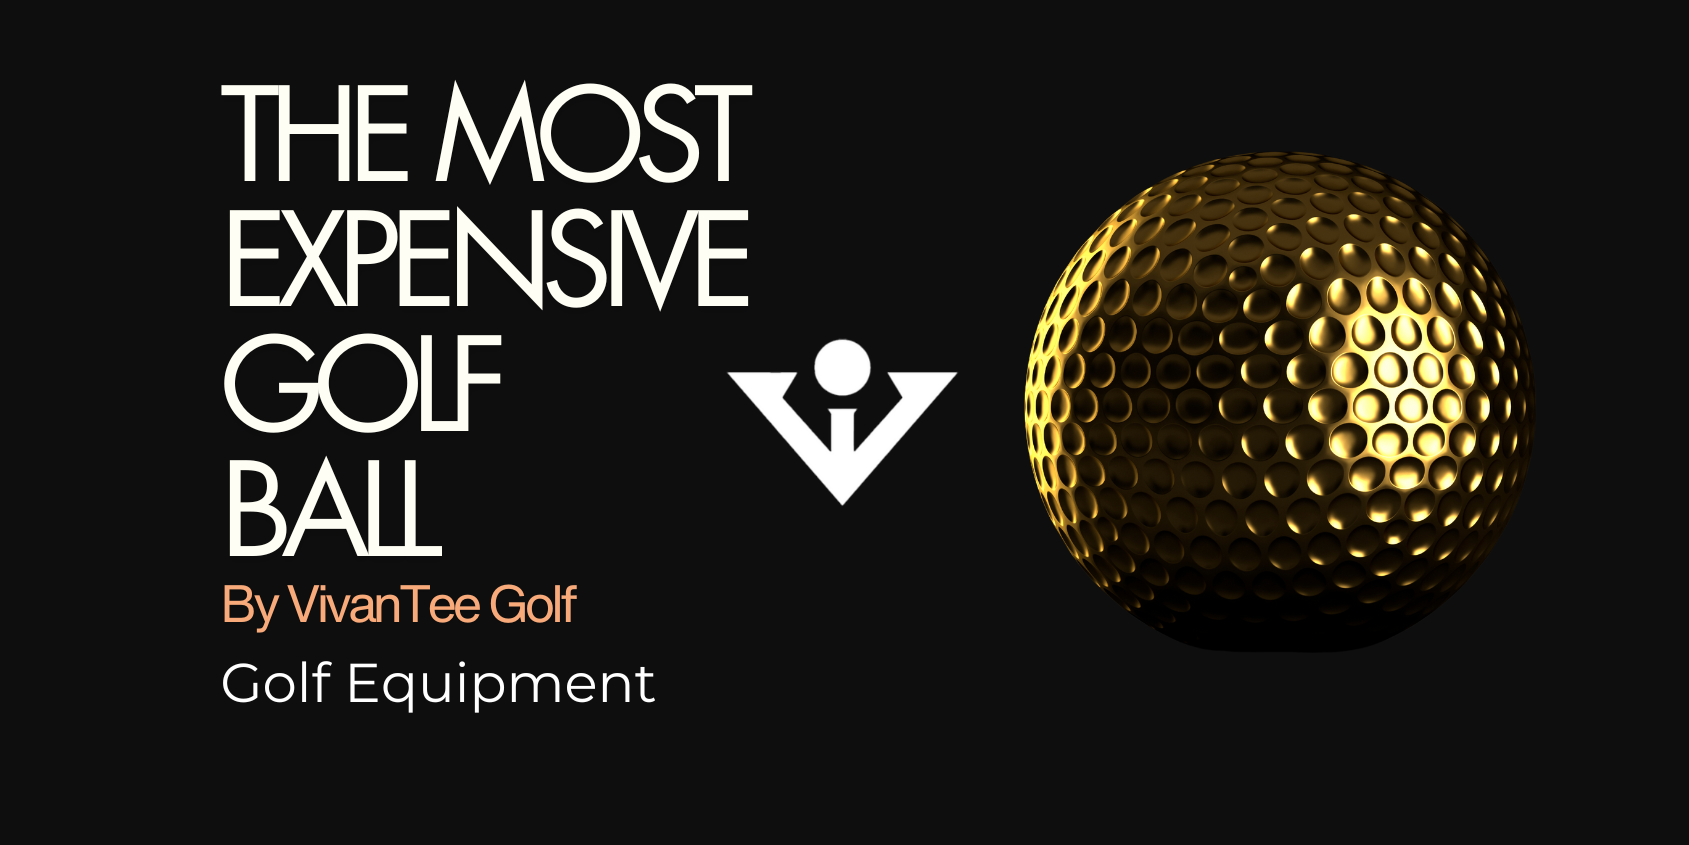 The Most Expensive Golf Ball banner for blog with a picture of a gold golf ball.  